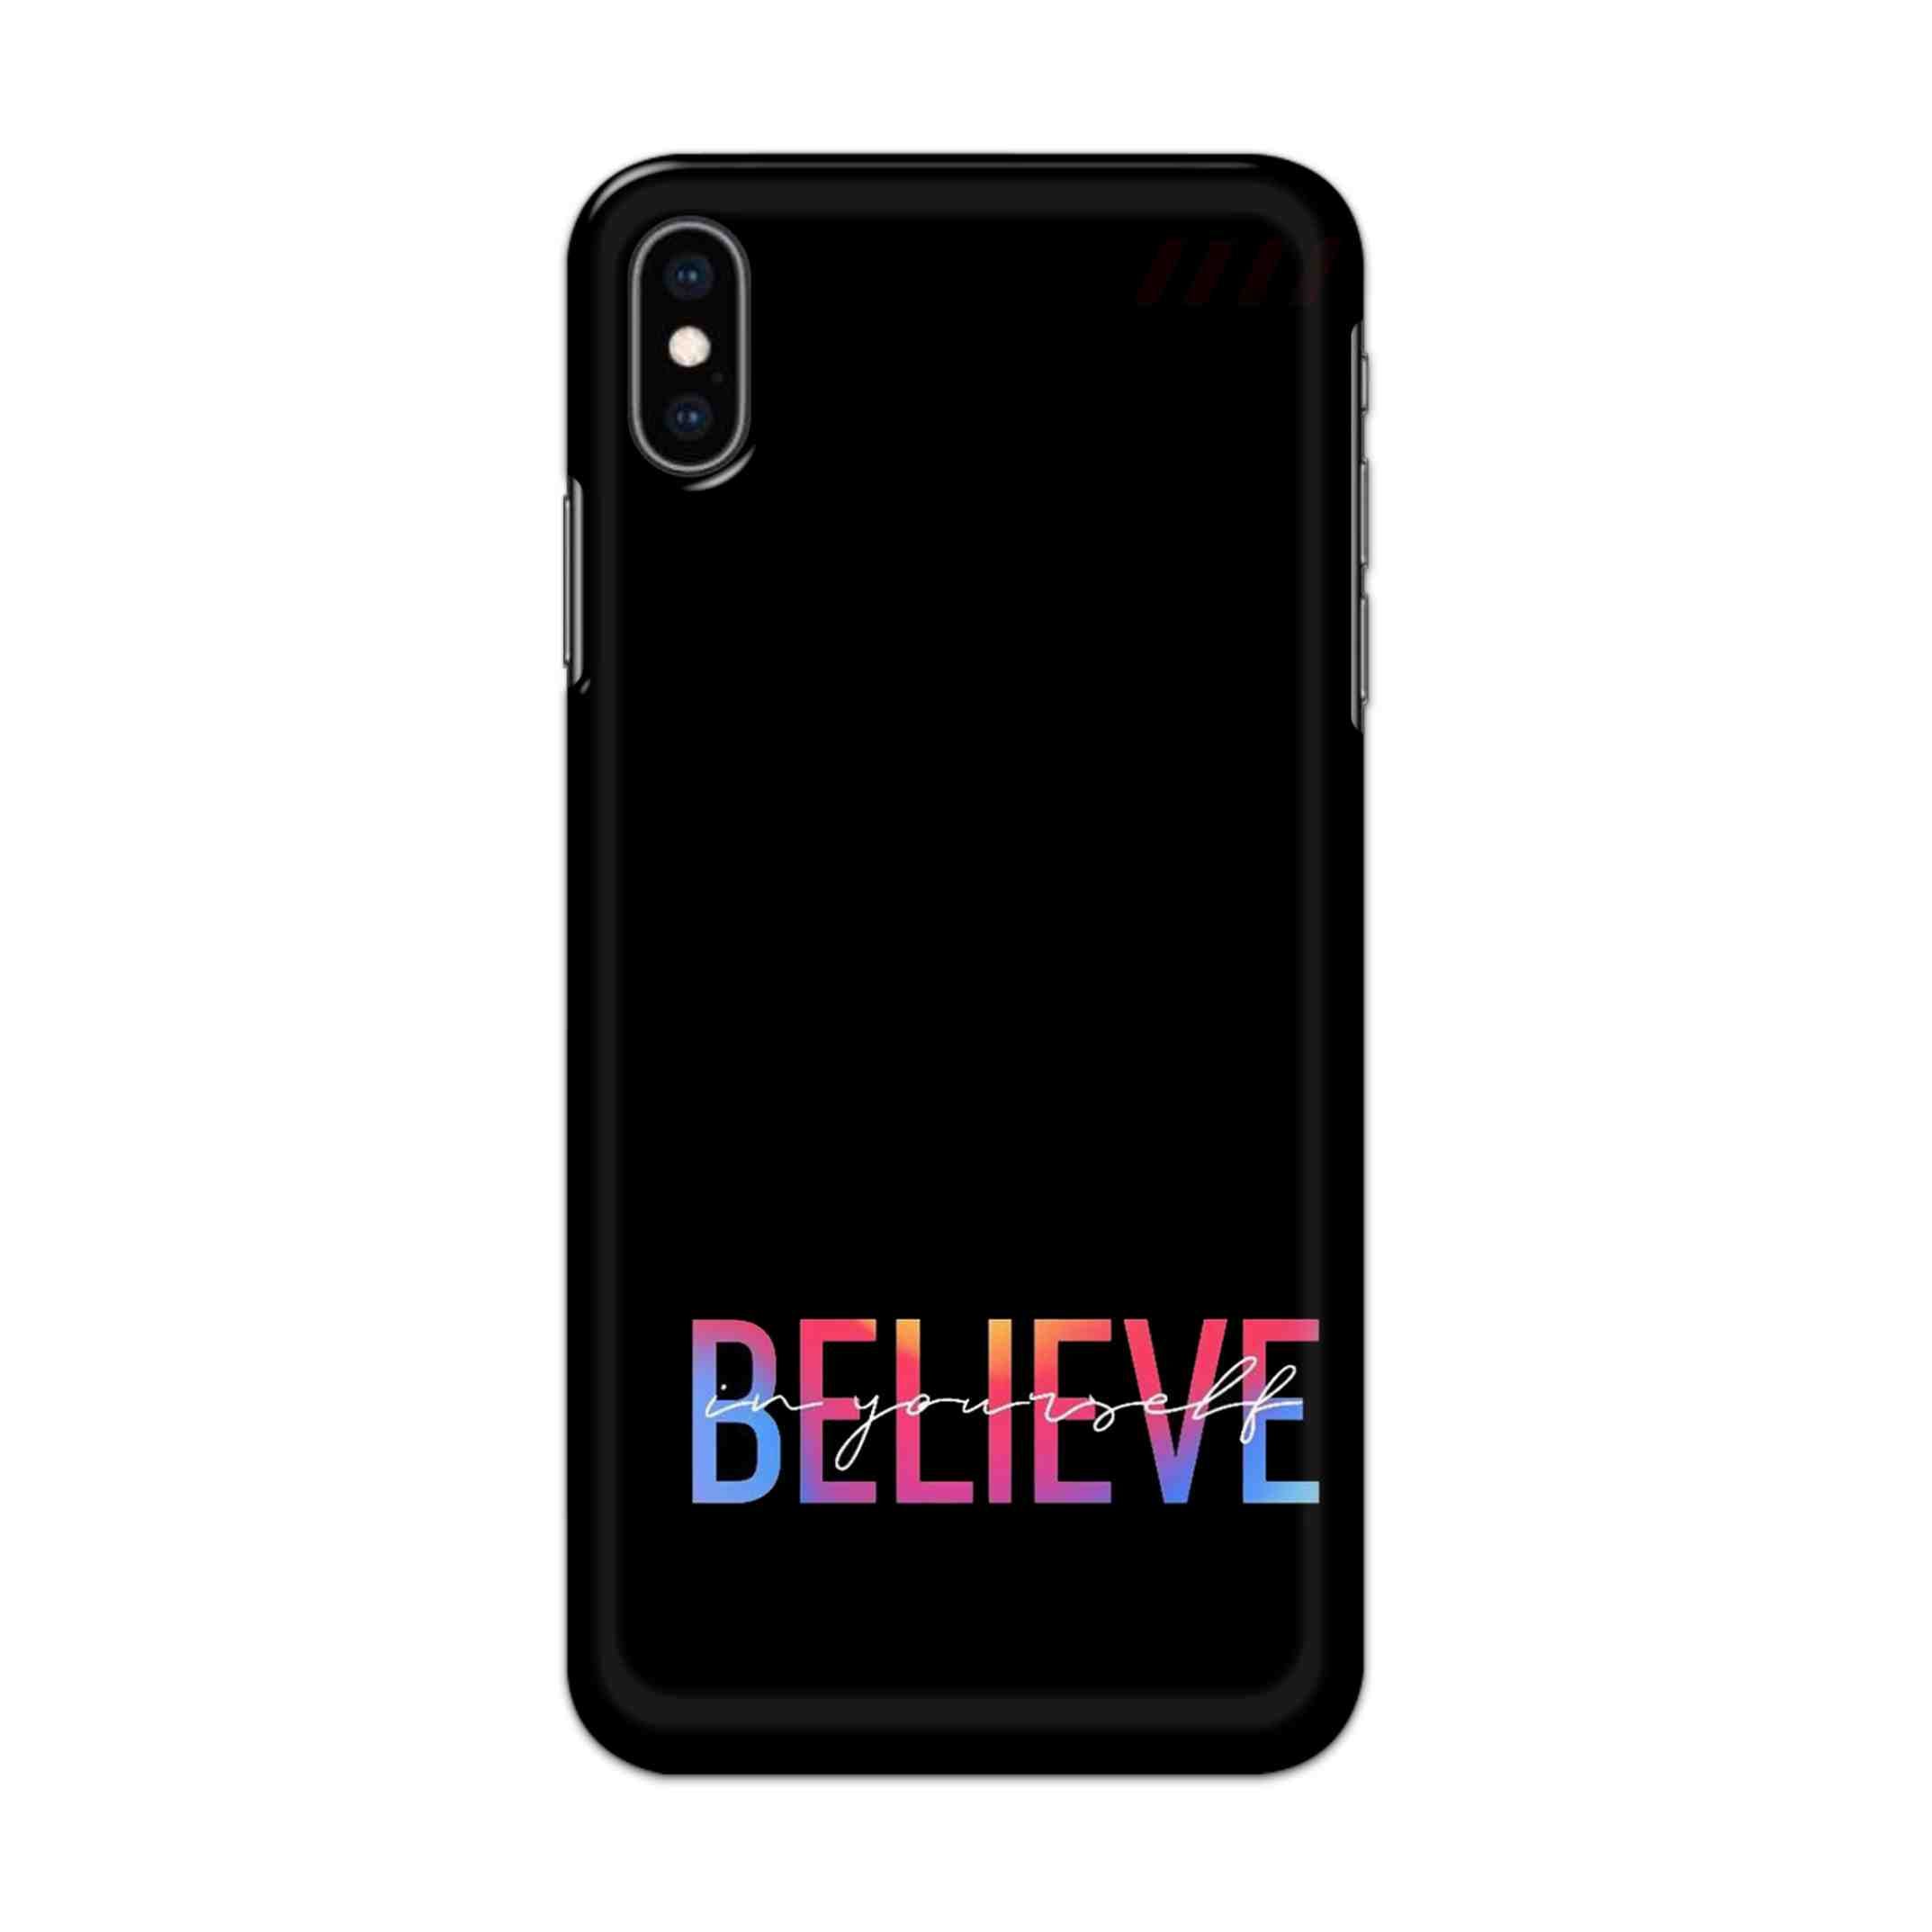 Buy Believe Hard Back Mobile Phone Case/Cover For iPhone XS MAX Online